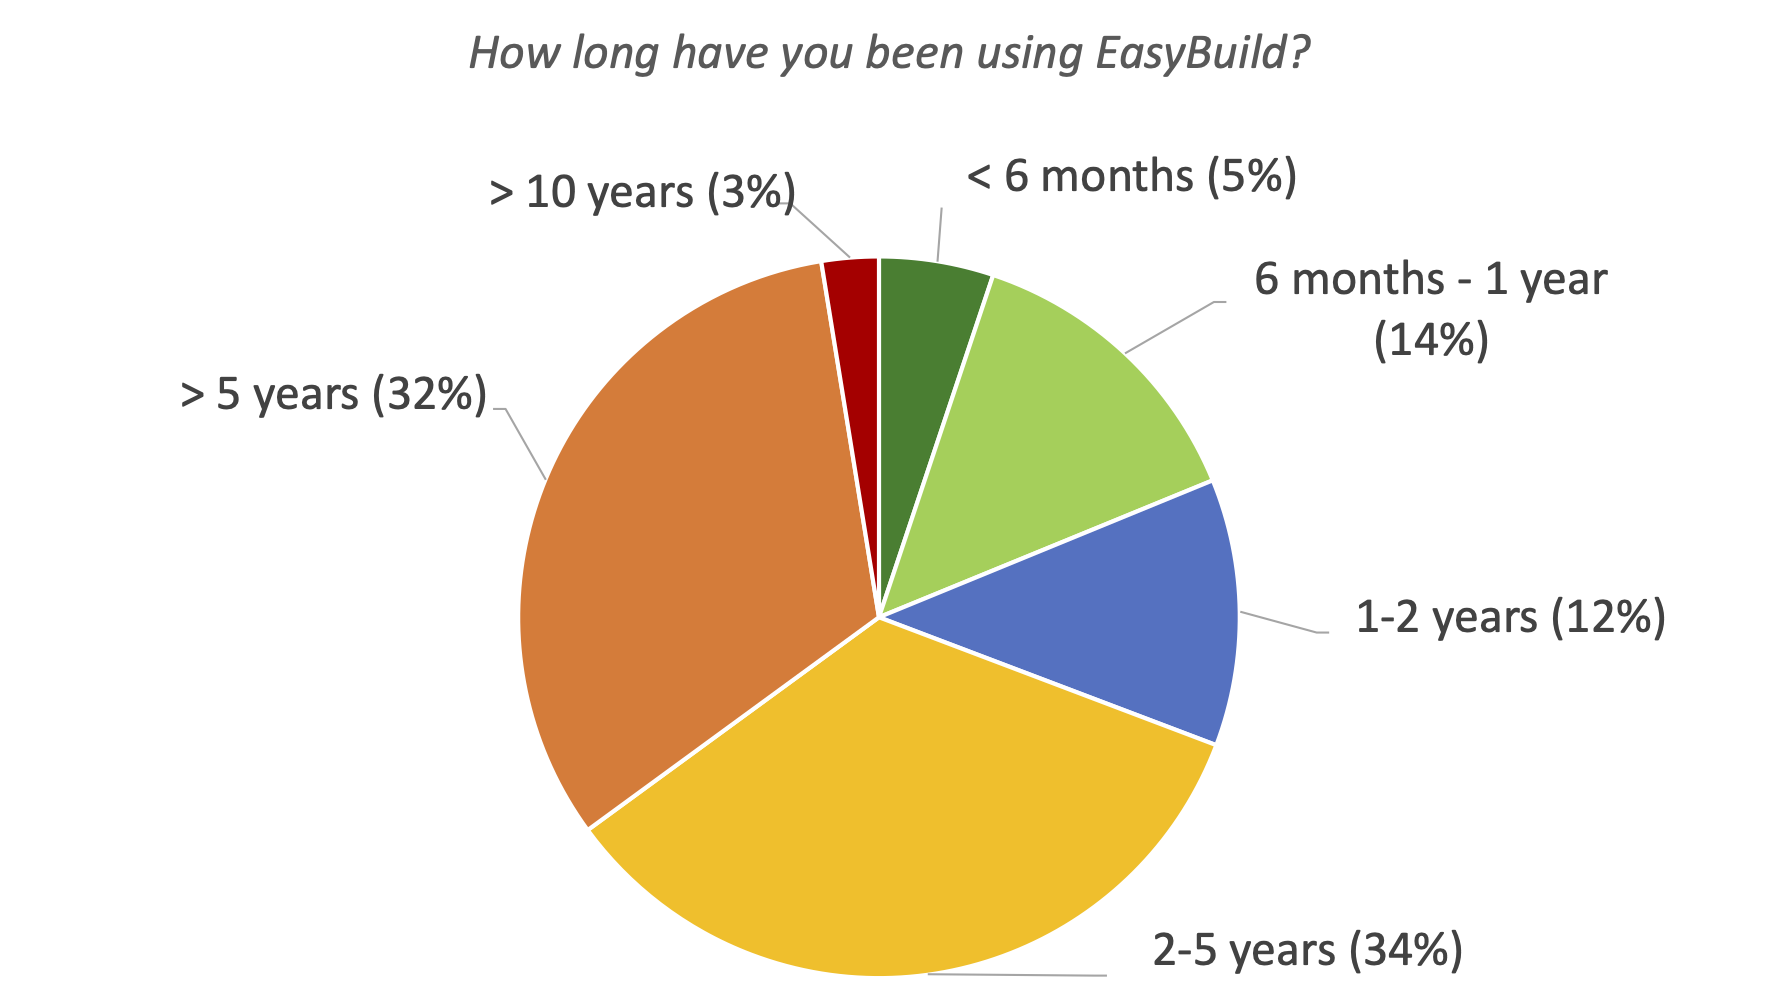 05. How long have you been using EasyBuild?